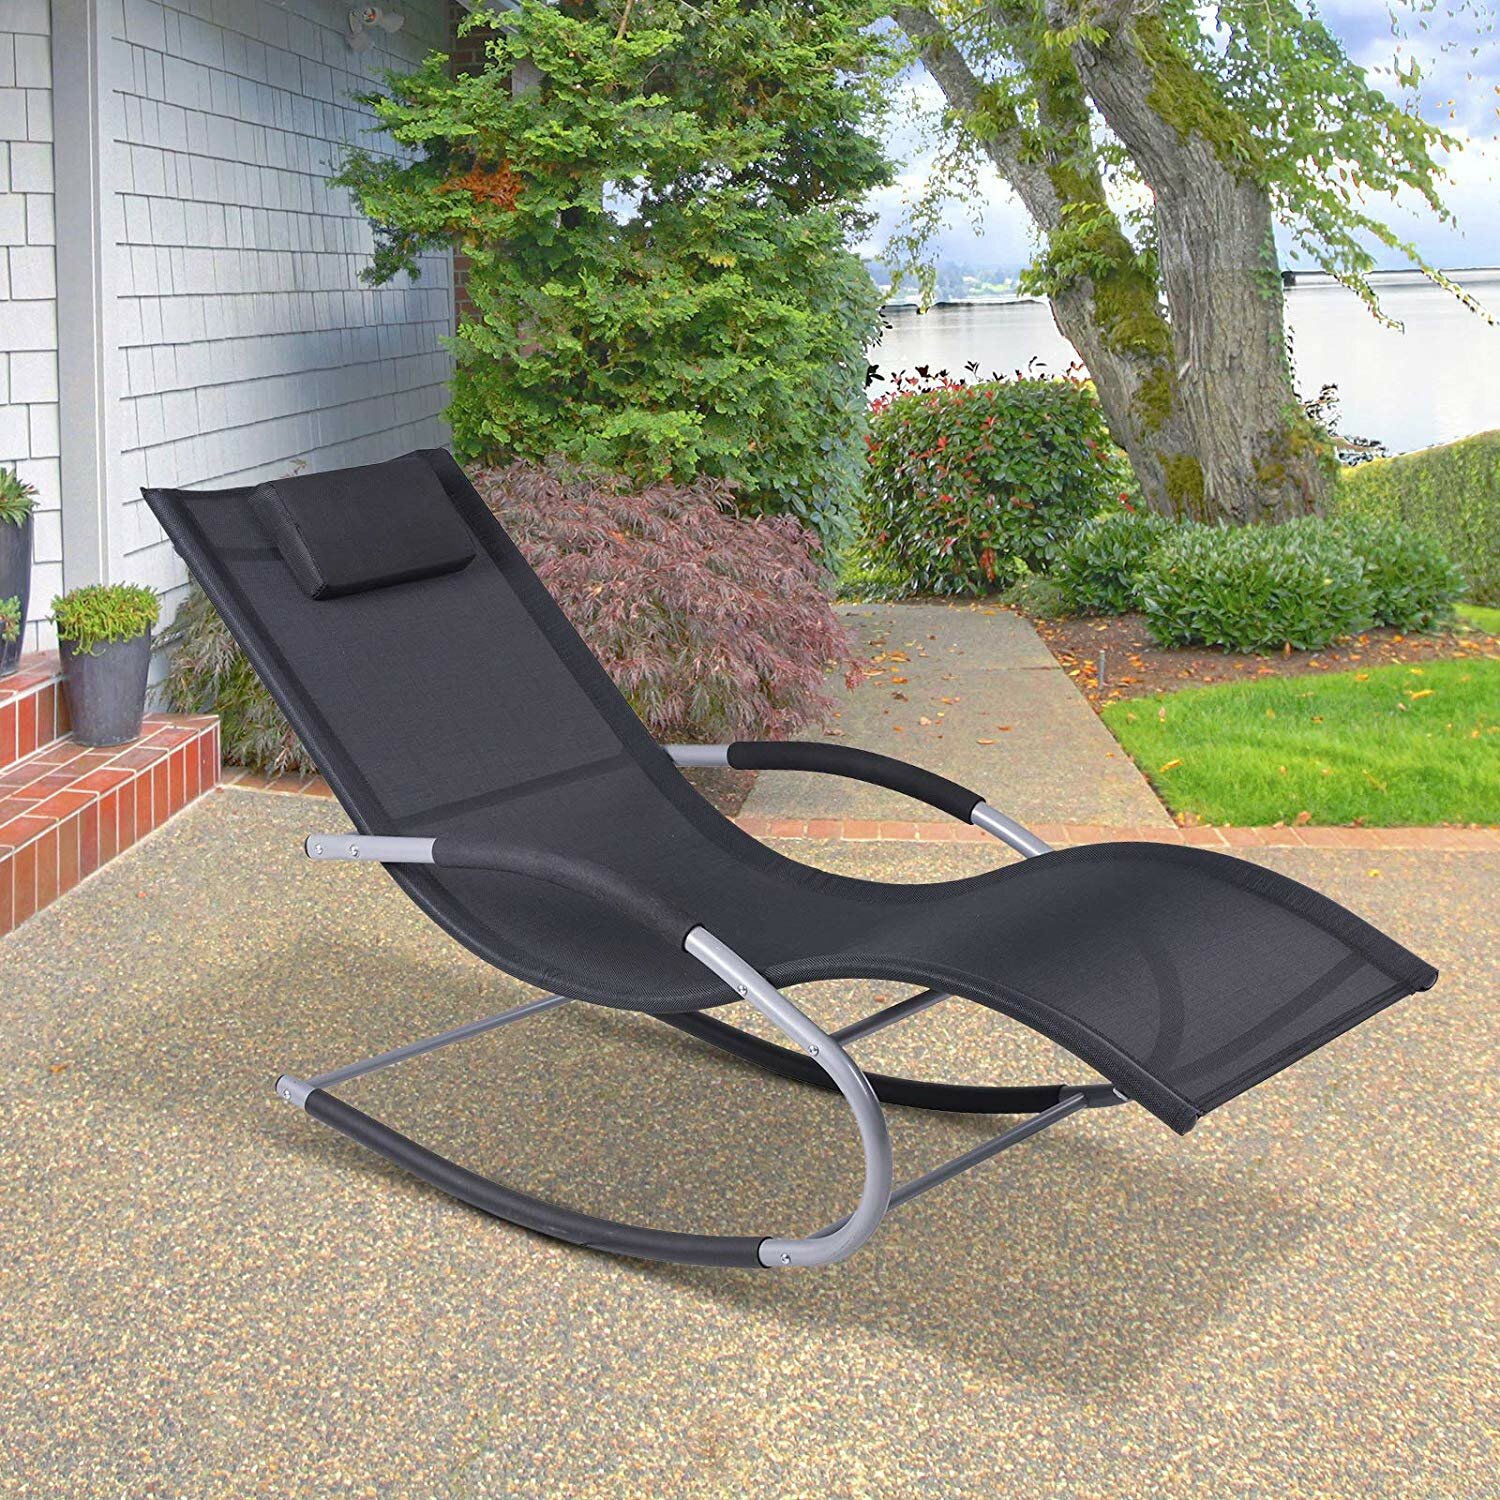 Outdoor Anti Gravity Chair | Outdoor Chairs